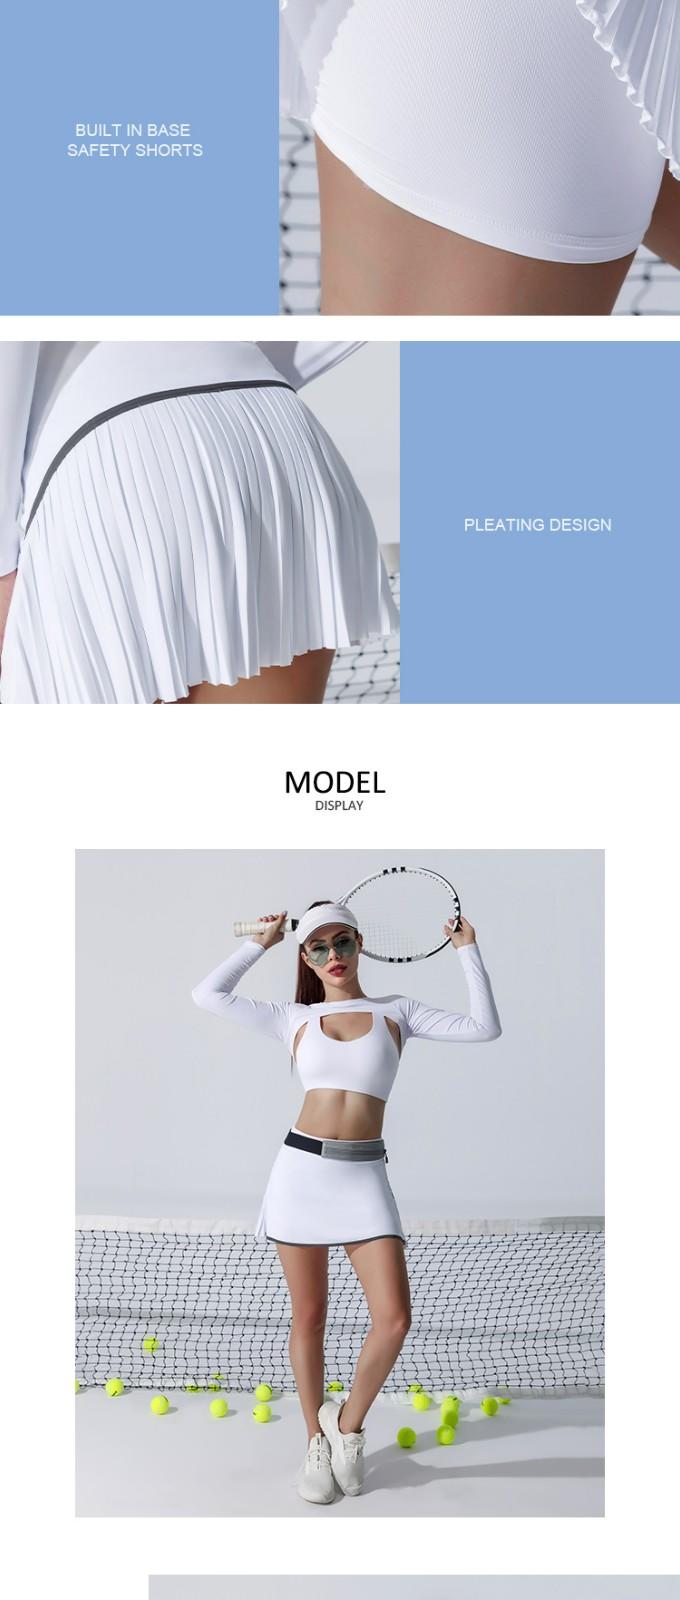 soft woman tennis clothes for sport